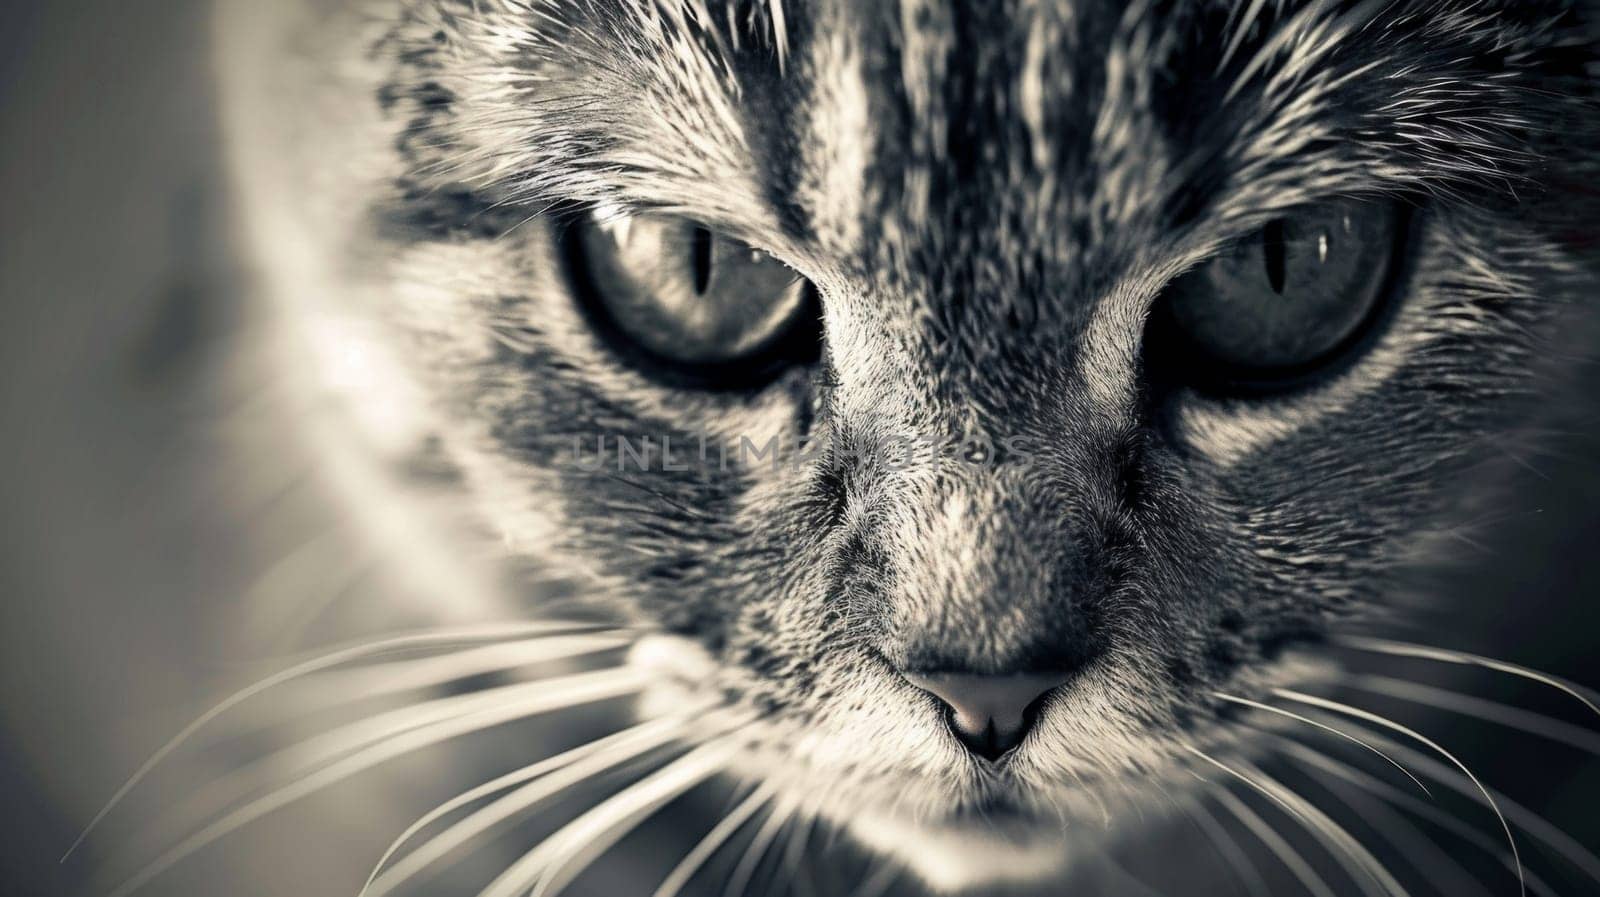 A close up of a cat's face with black and white photo